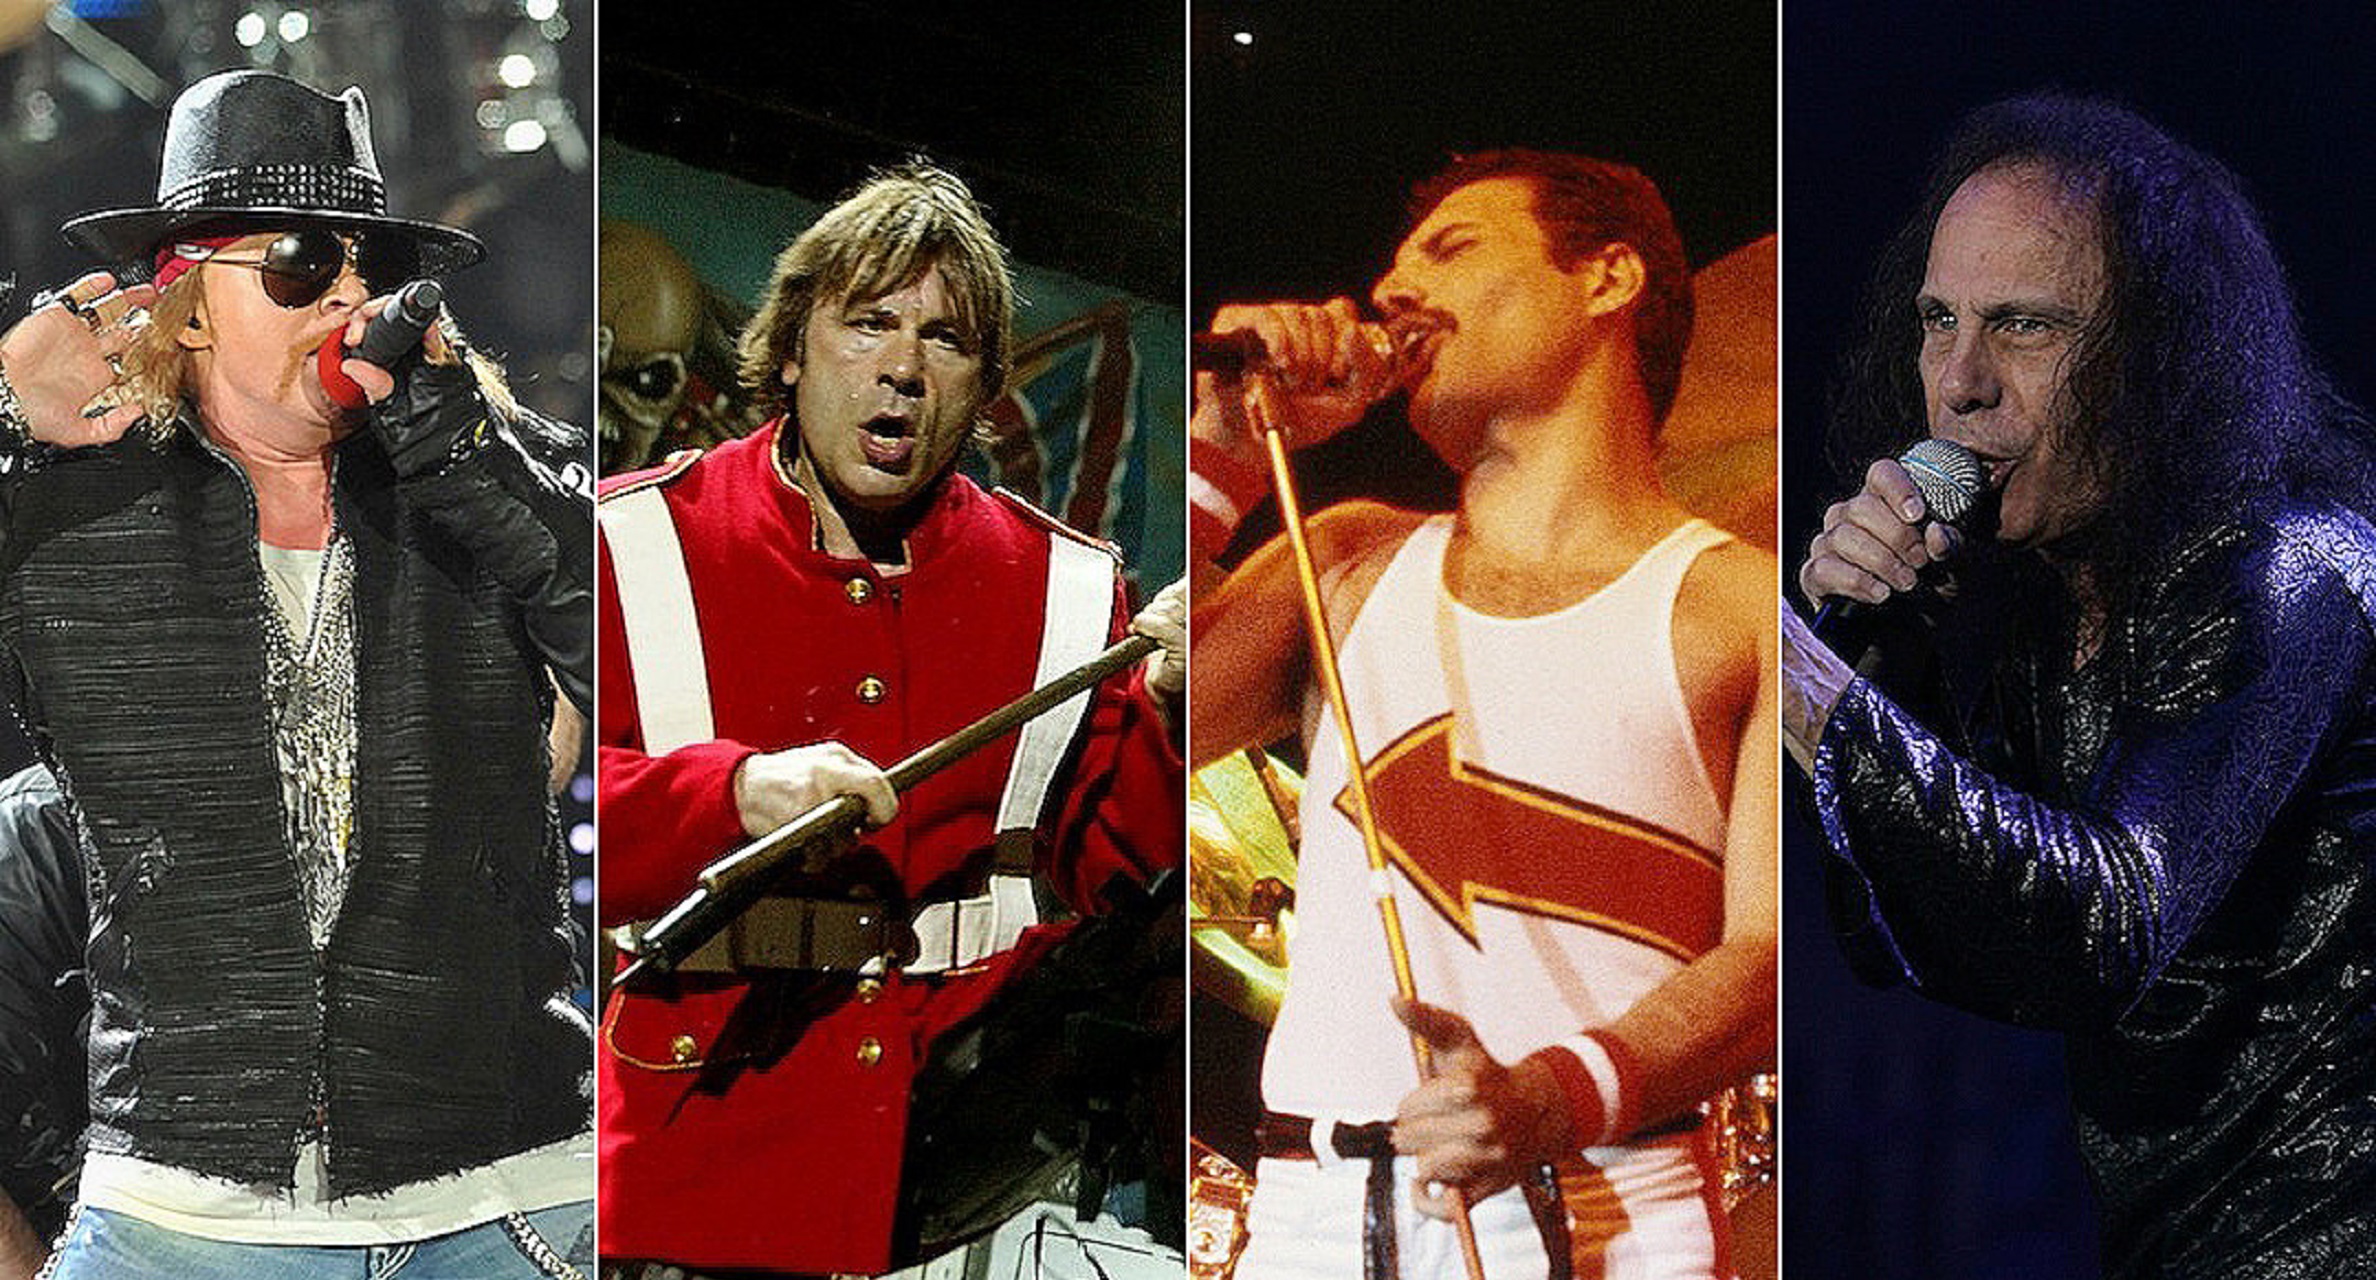 POLL: Who Is The Best Male Rock Singer Of All Time? Vote